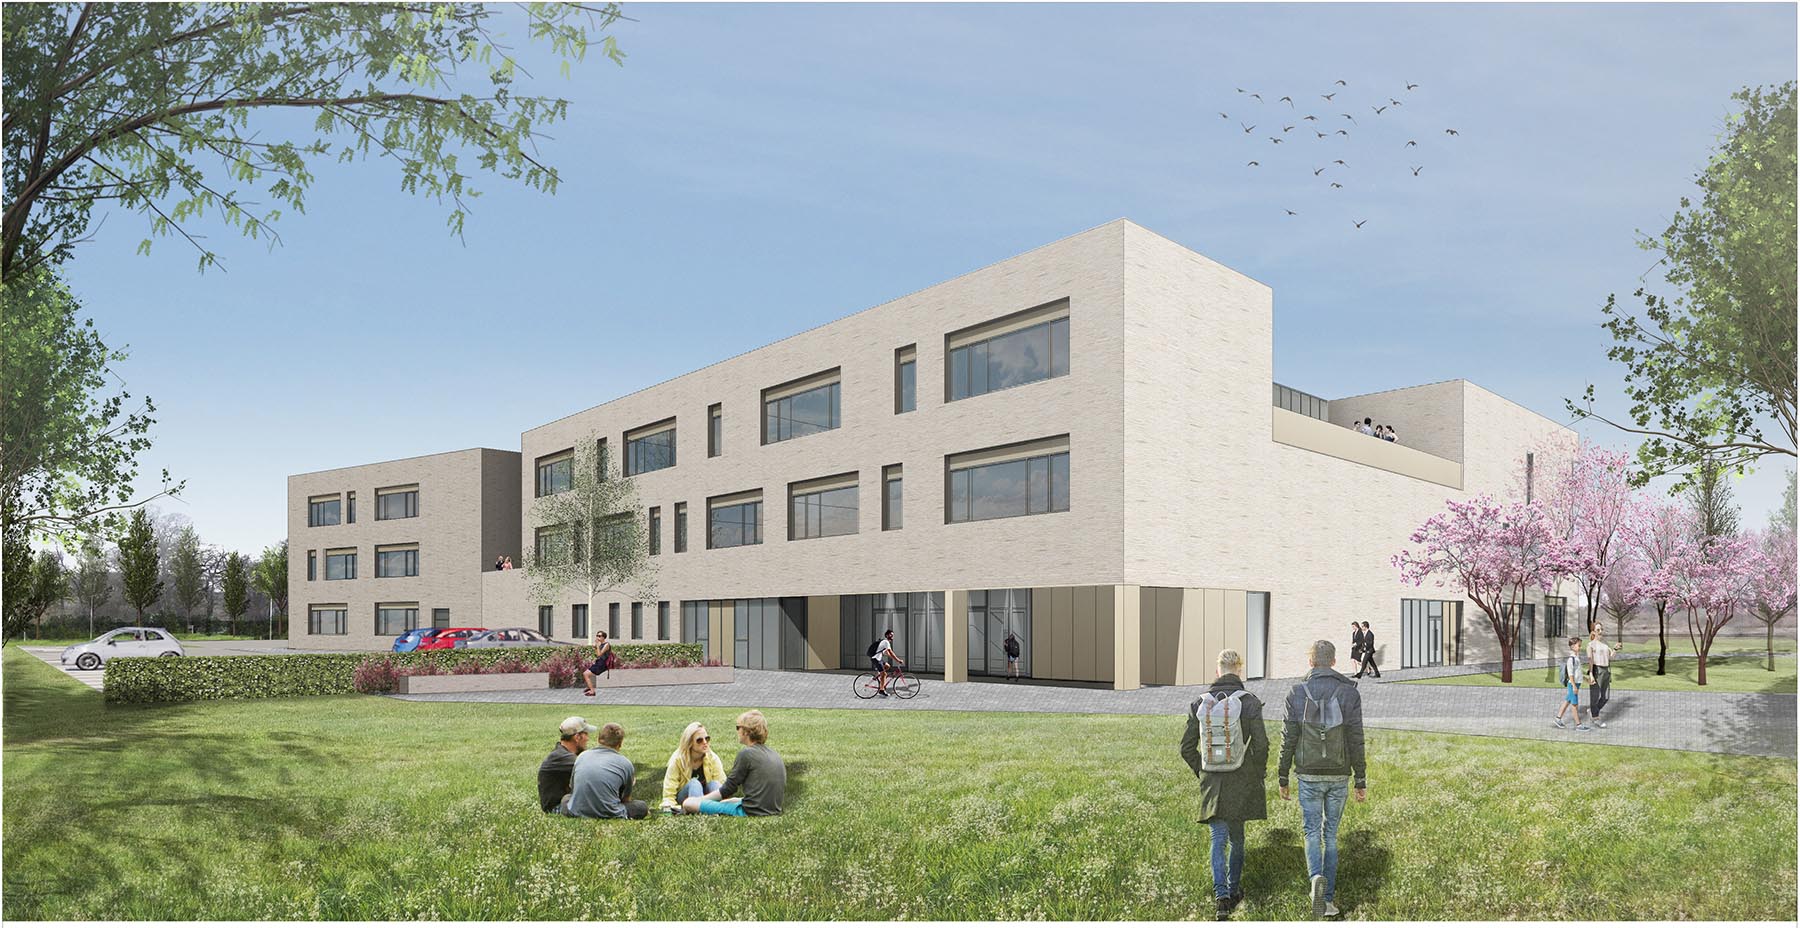 New Winchburgh Academy to open in August 2022